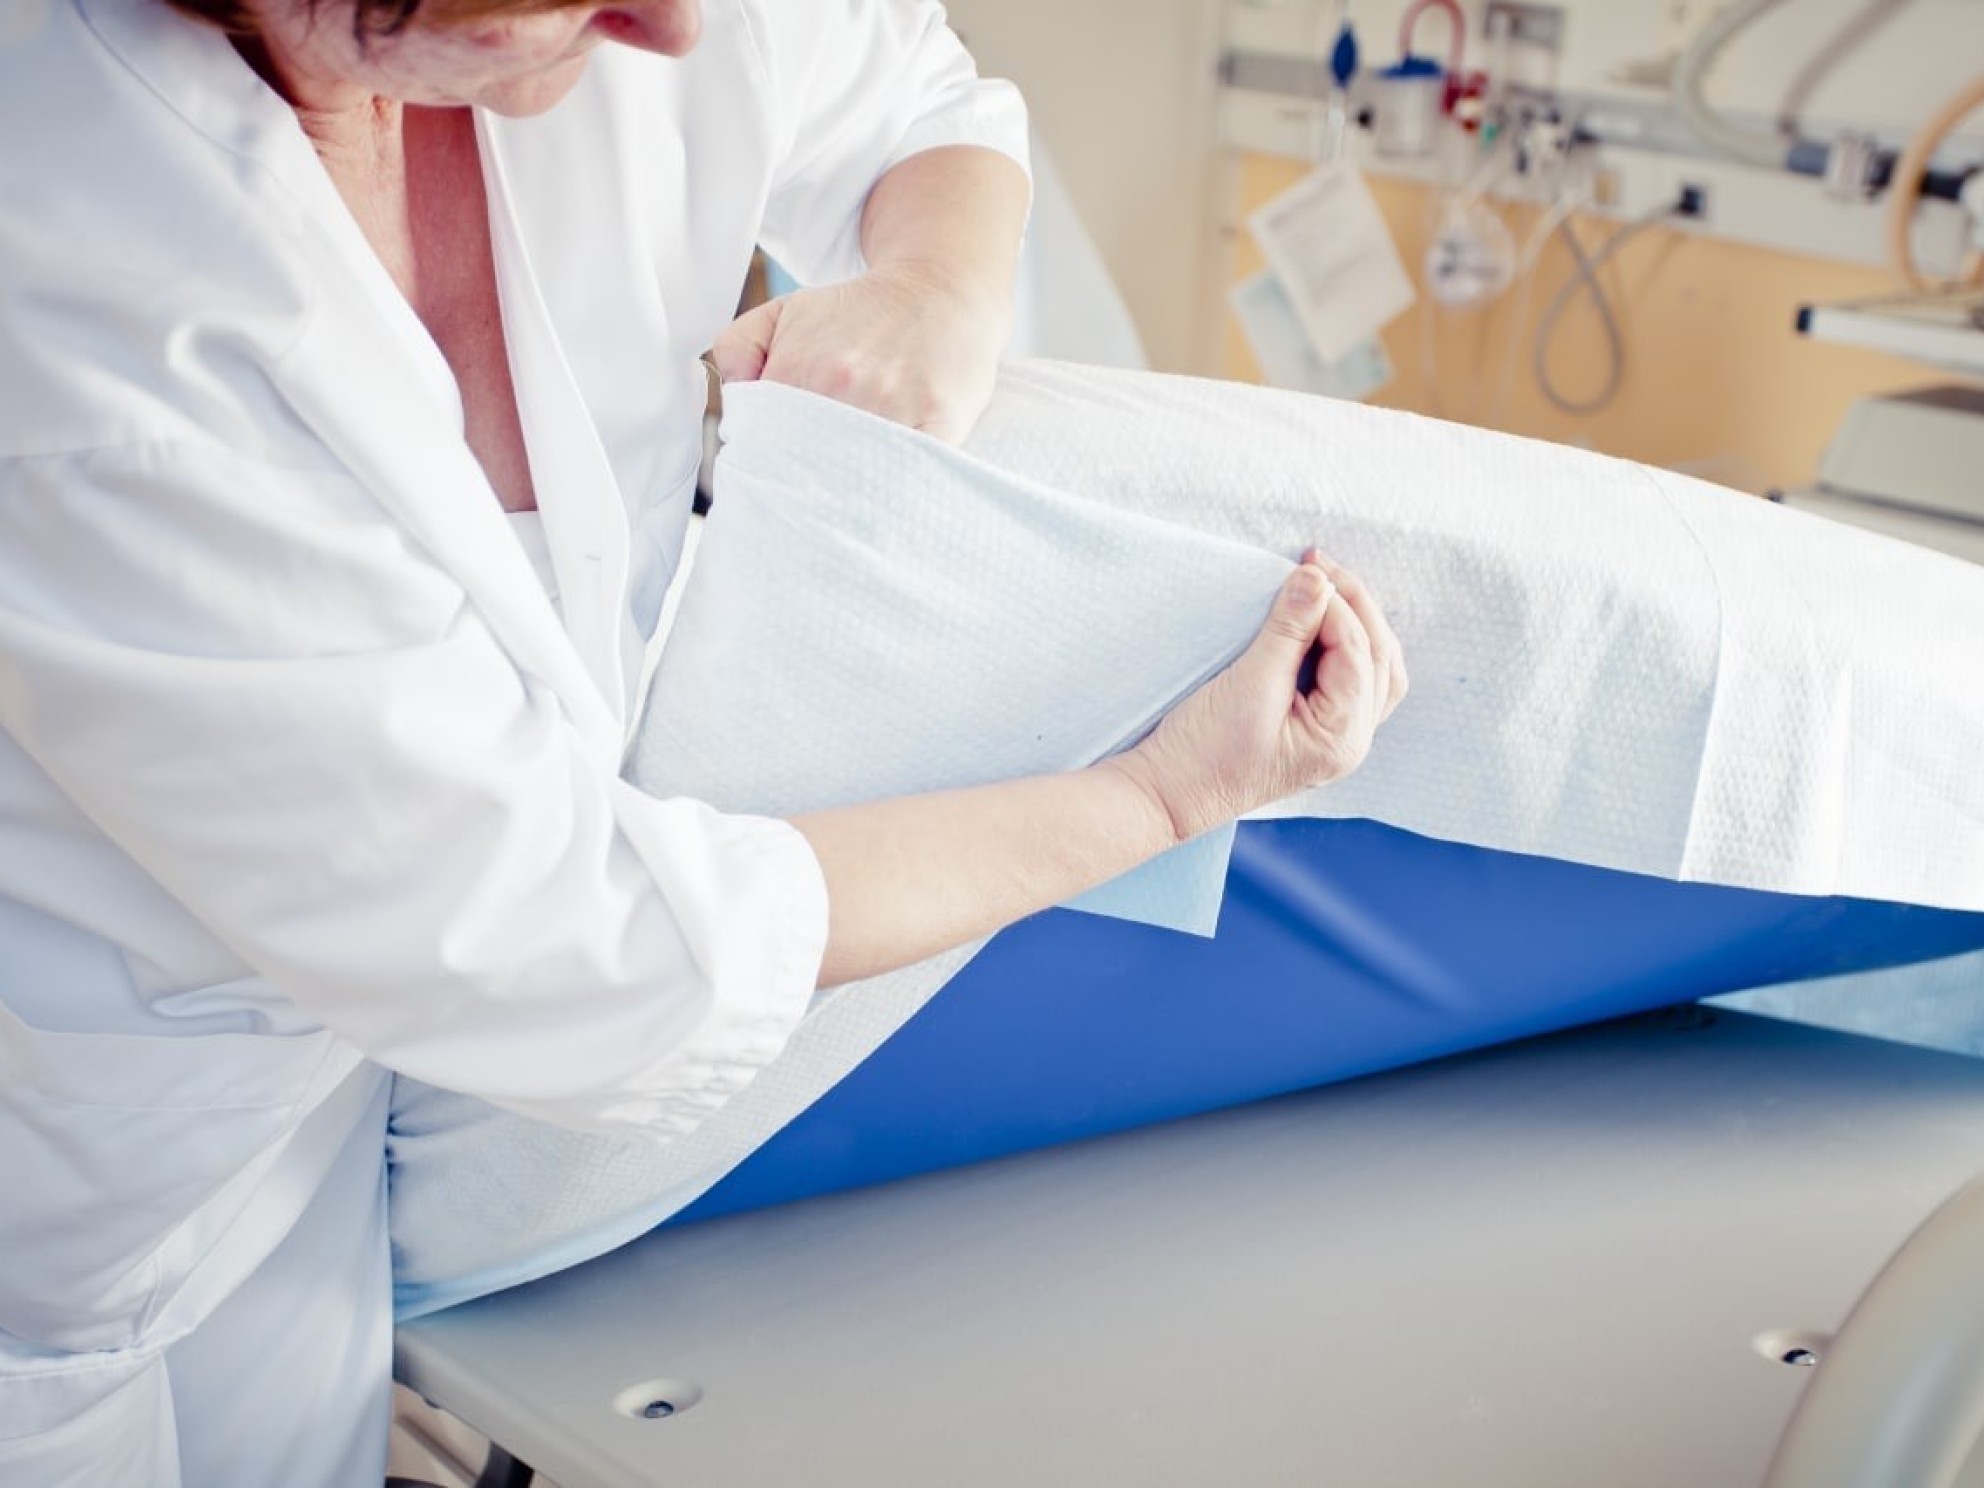 Image of a nurse placing a special sheet on a hospital bed.